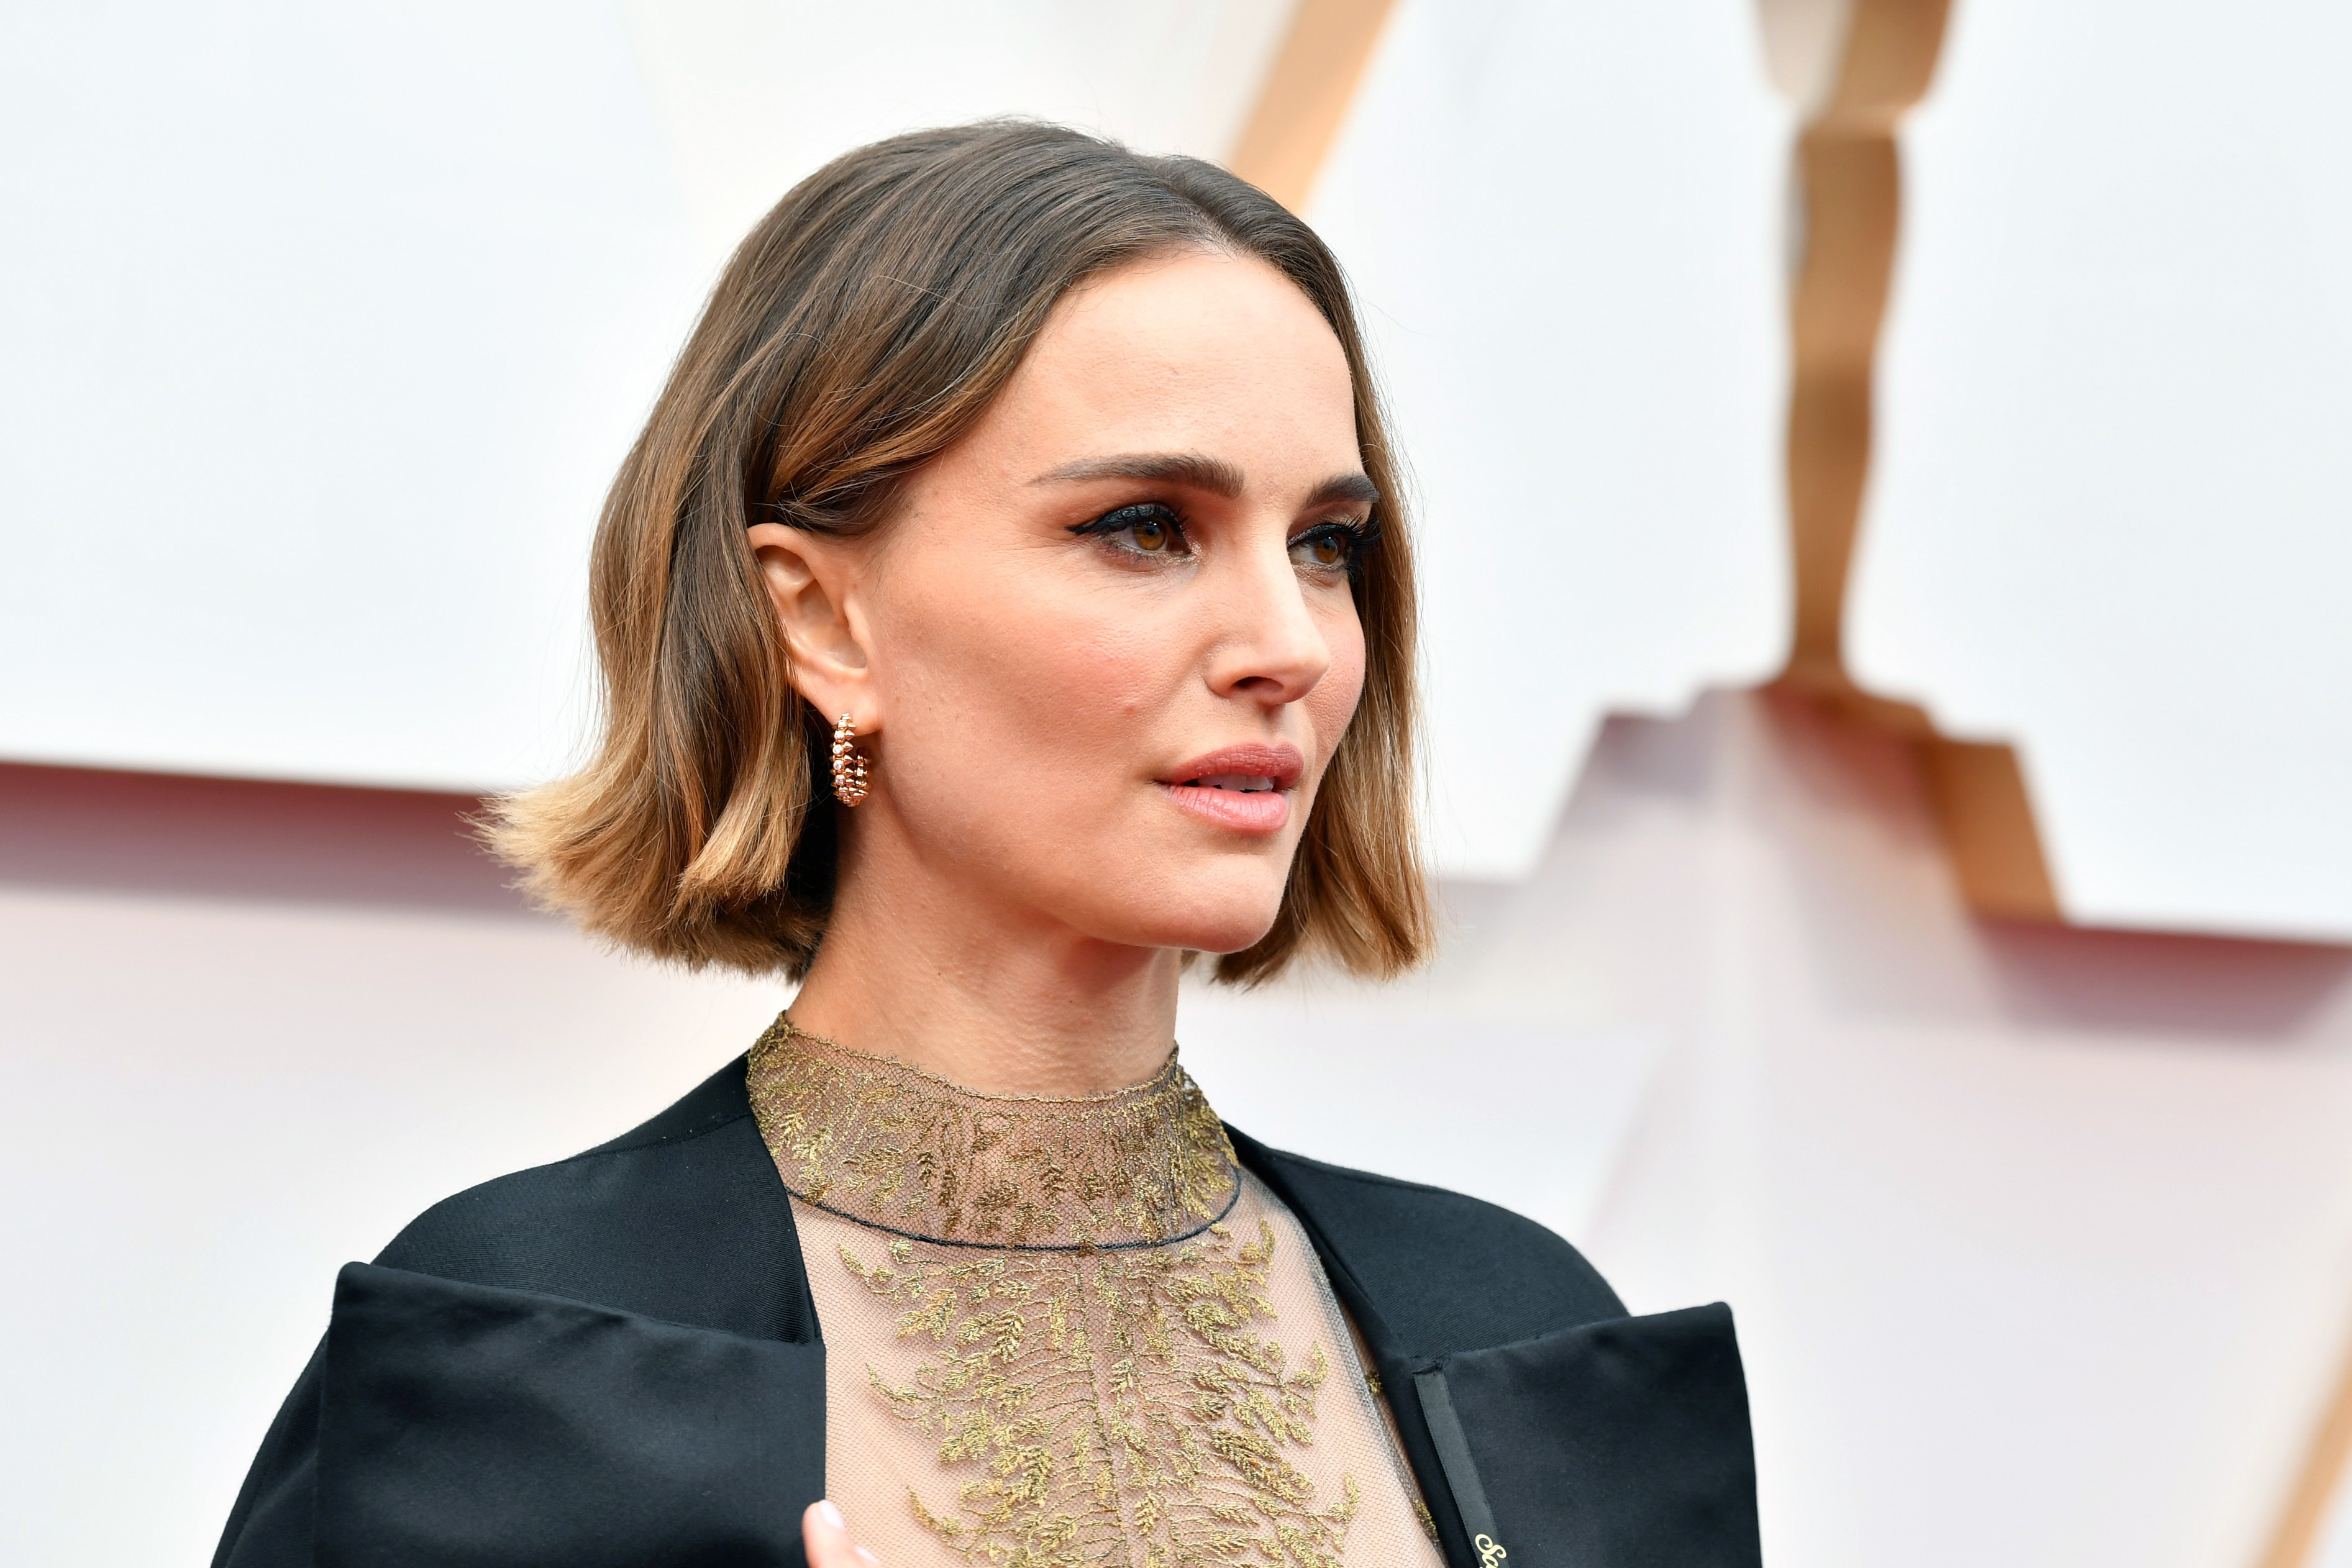 Natalie Portman Fuck - Natalie Portman On Being Sexualized As A Child Actor